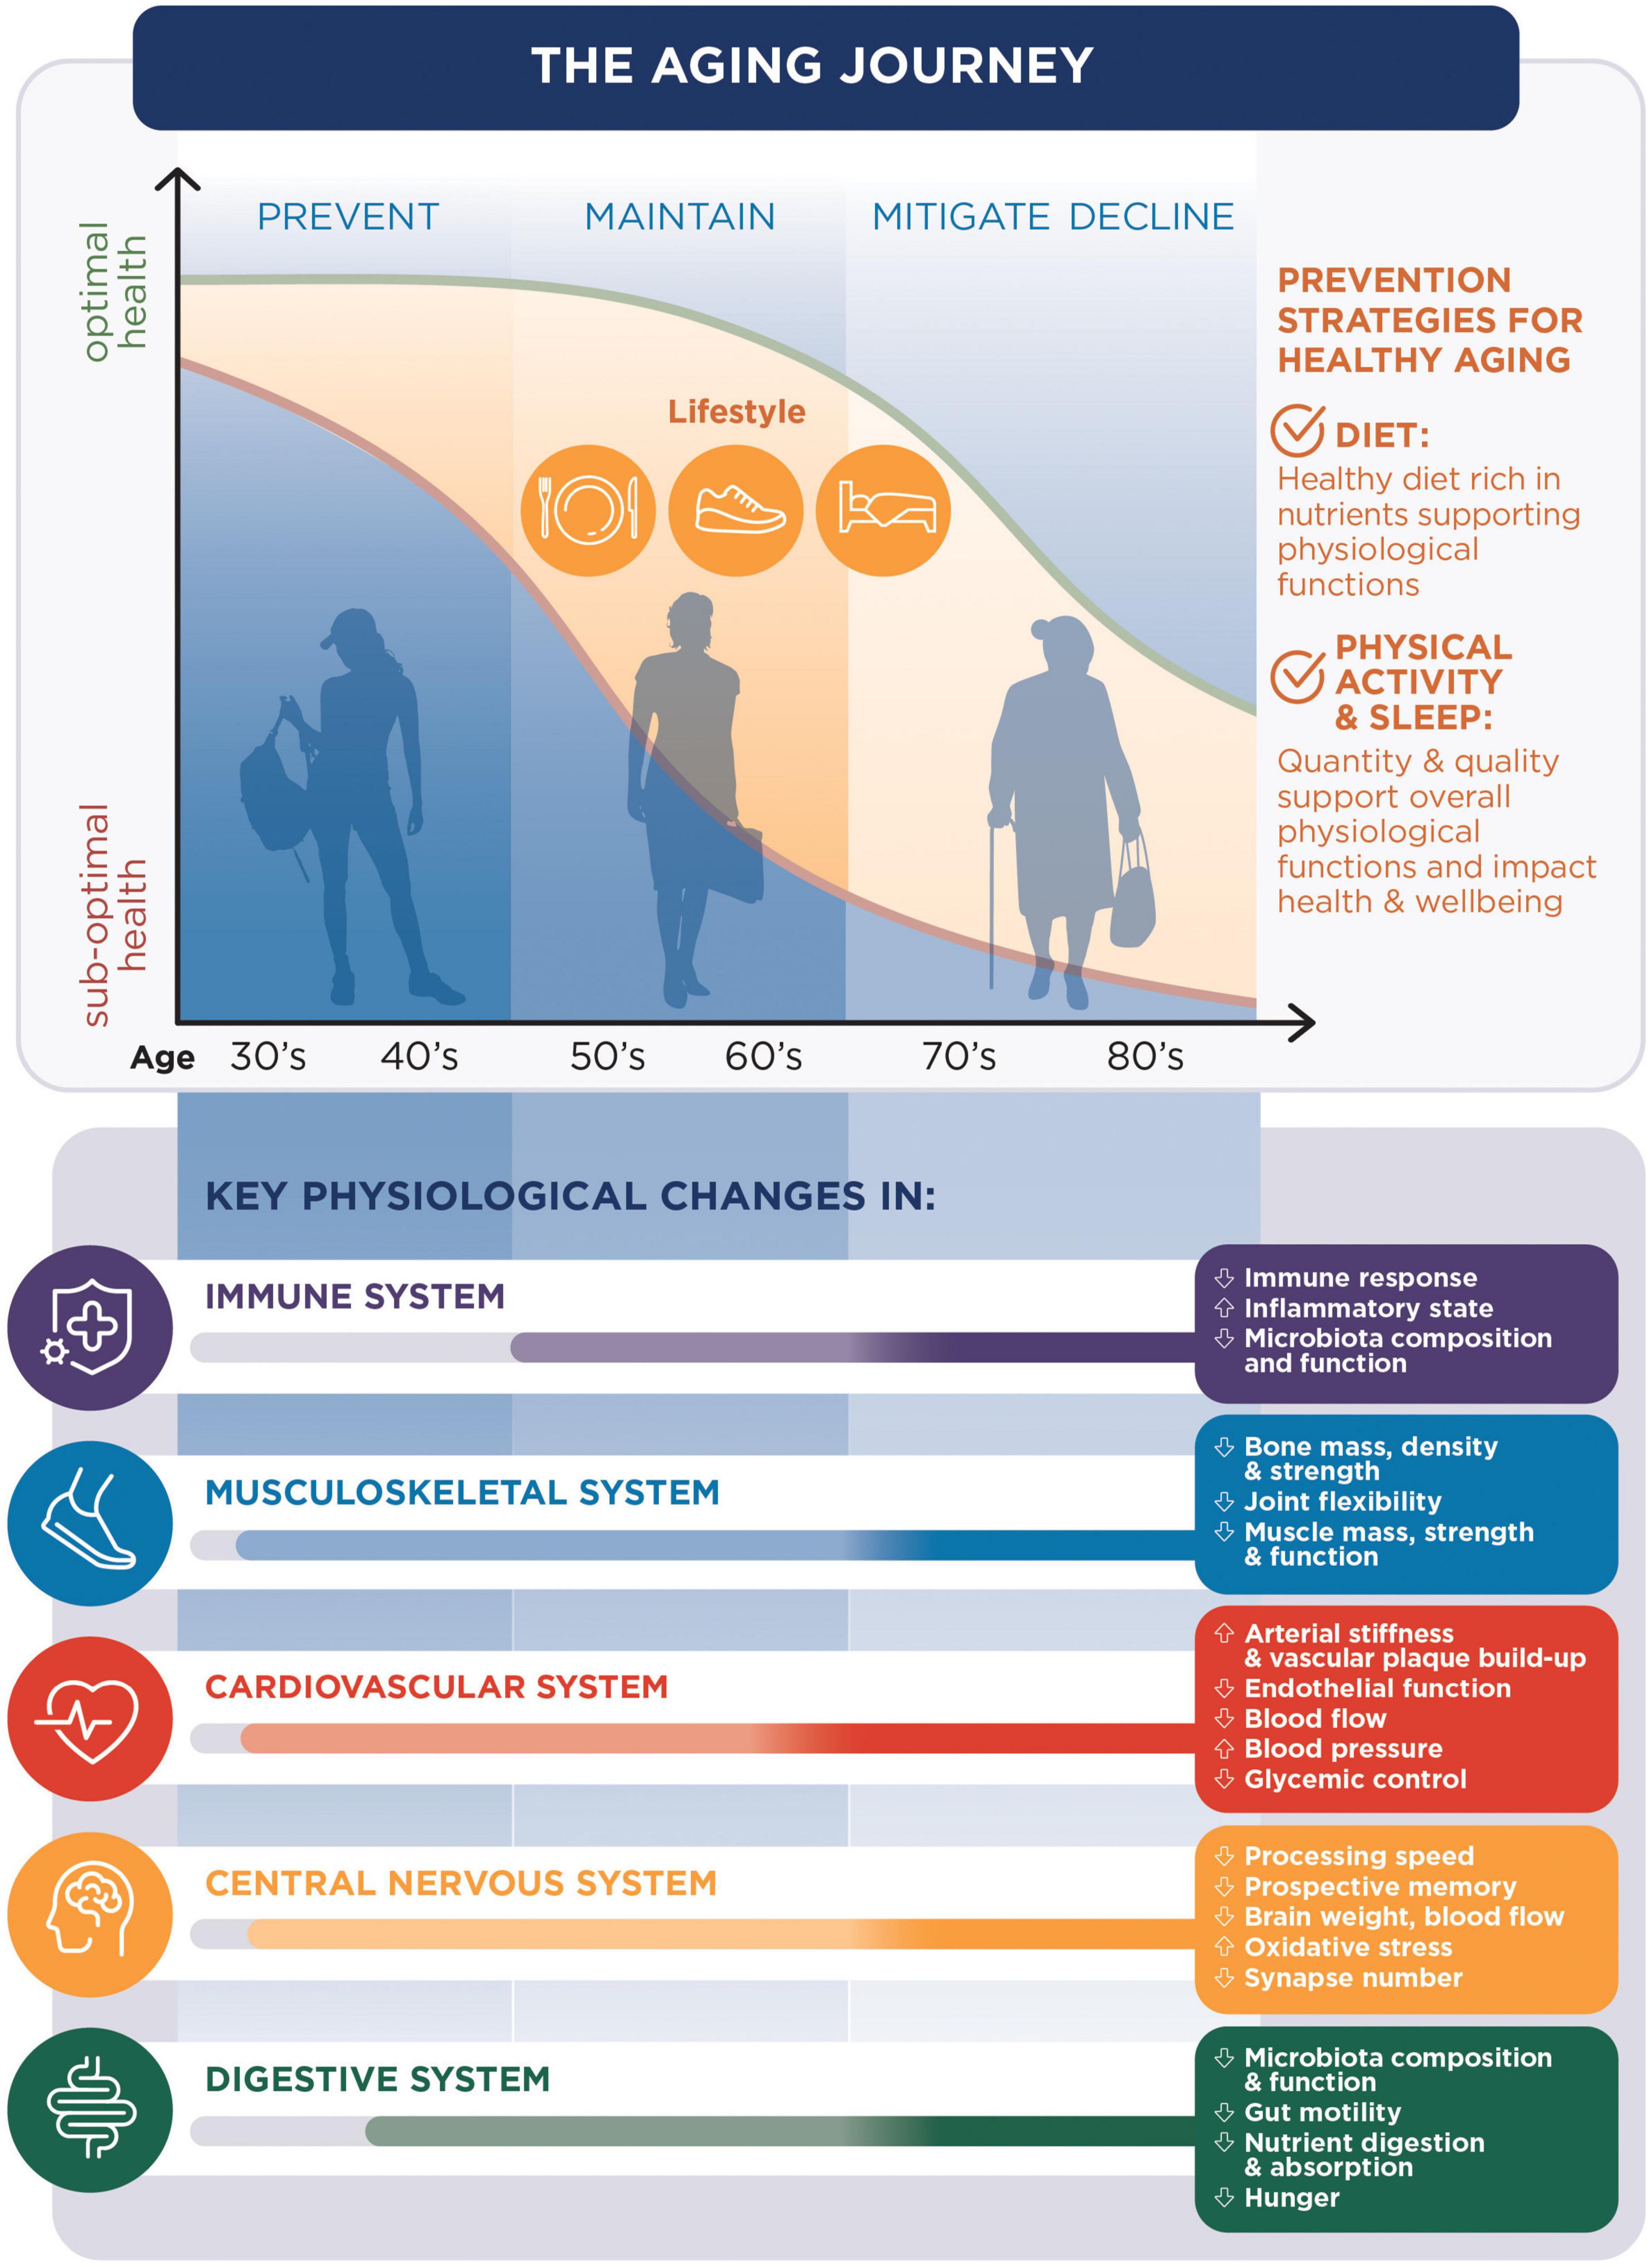 Frontiers  Nutritional and lifestyle management of the aging journey: A  narrative review